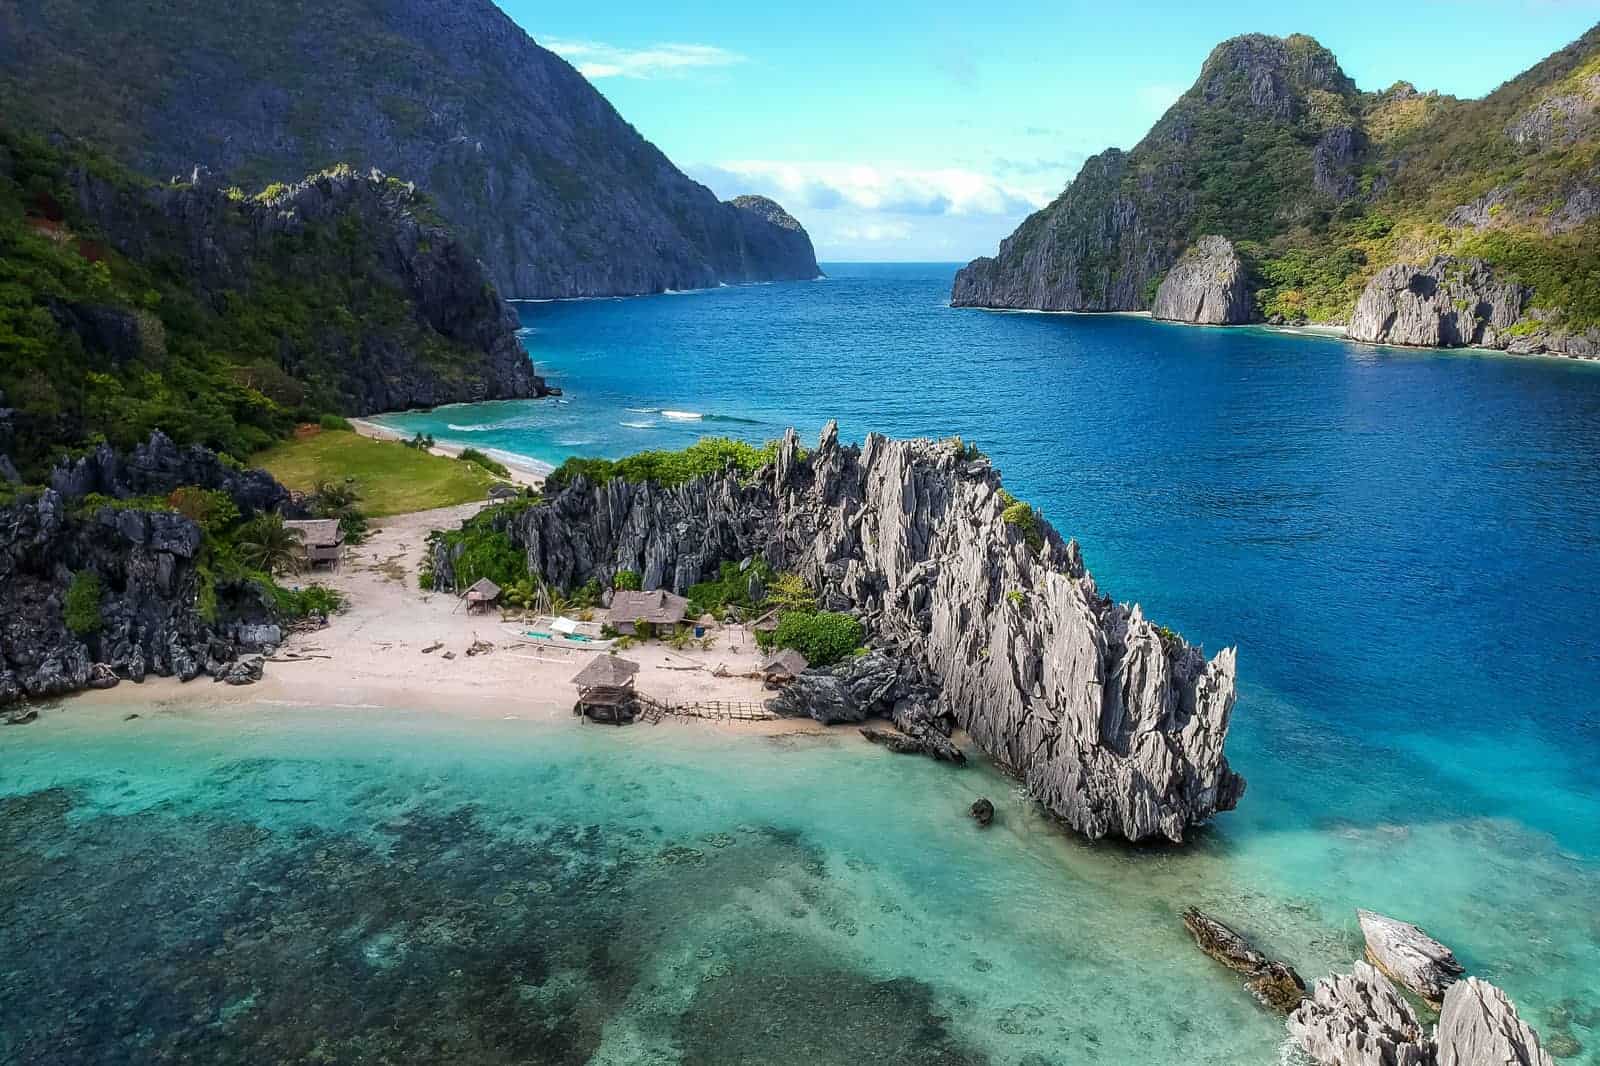 Star beach El Nido Philippines from above with stunning cliffs and blue water.